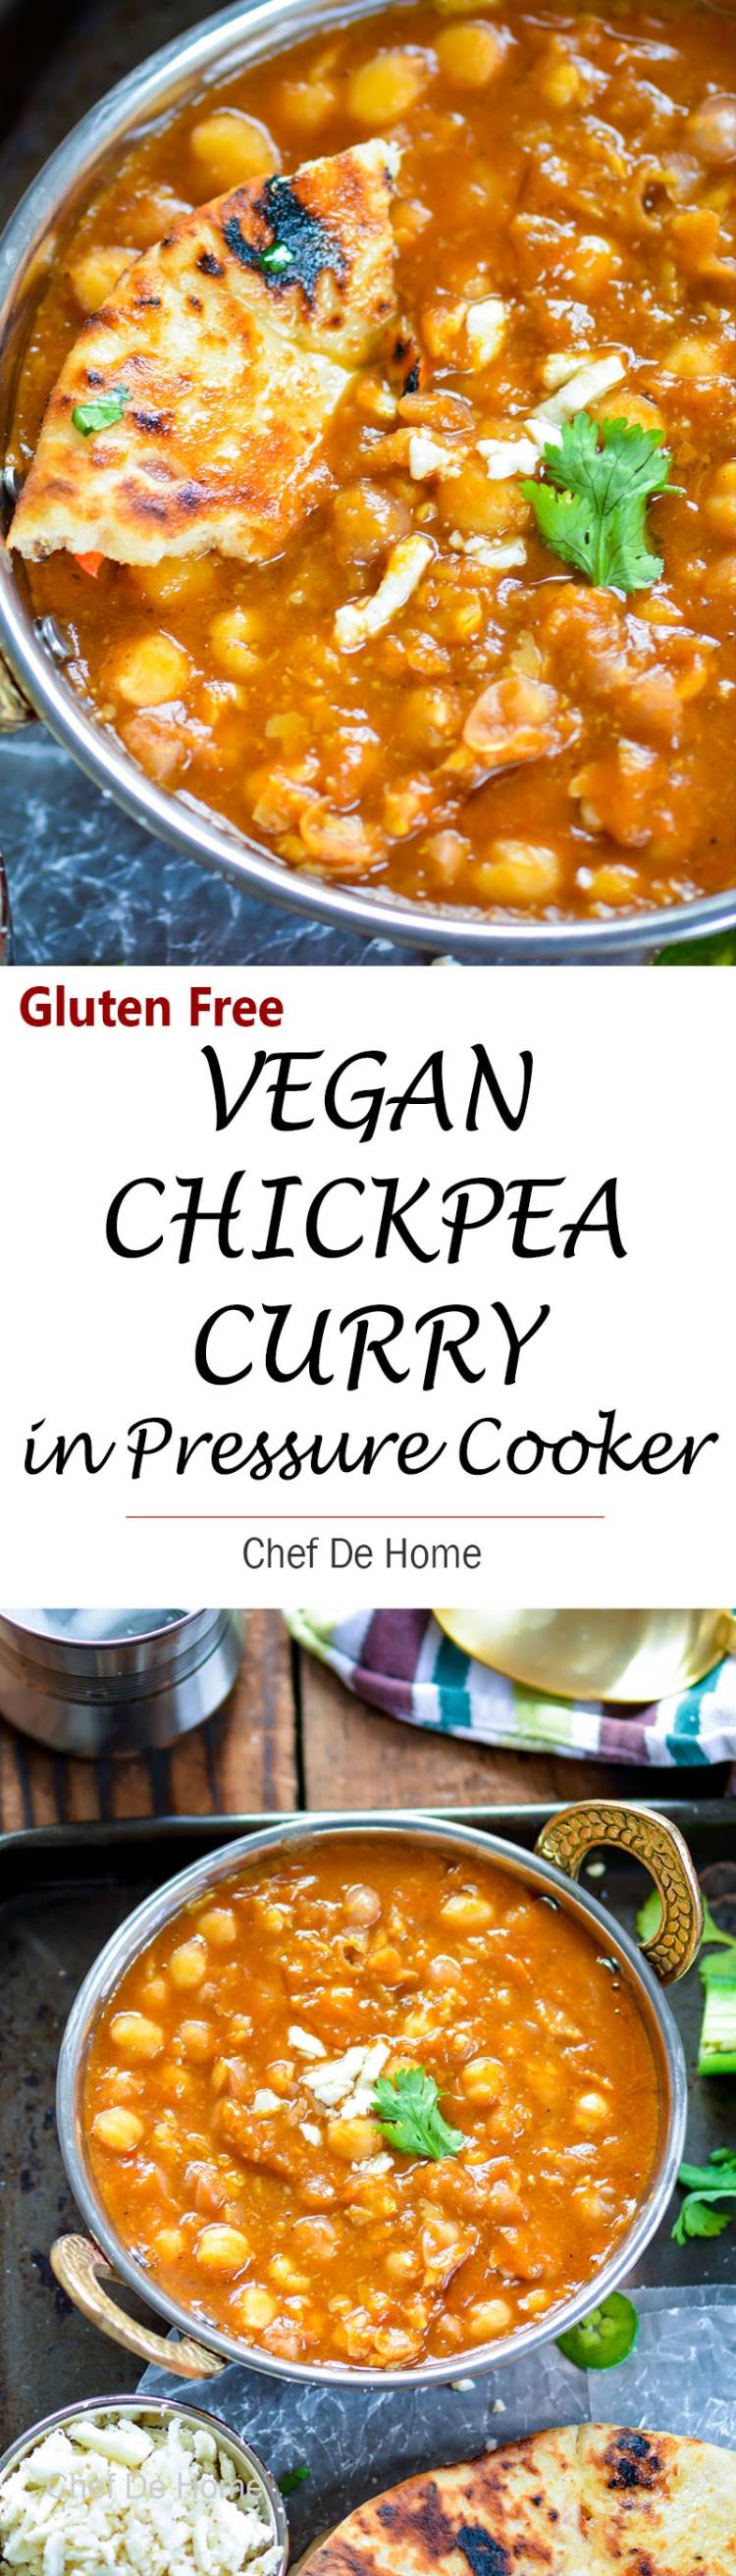 Simple and Easy Vegan Chickpea Curry made from scratch in pressure cooker | chefdehome.com